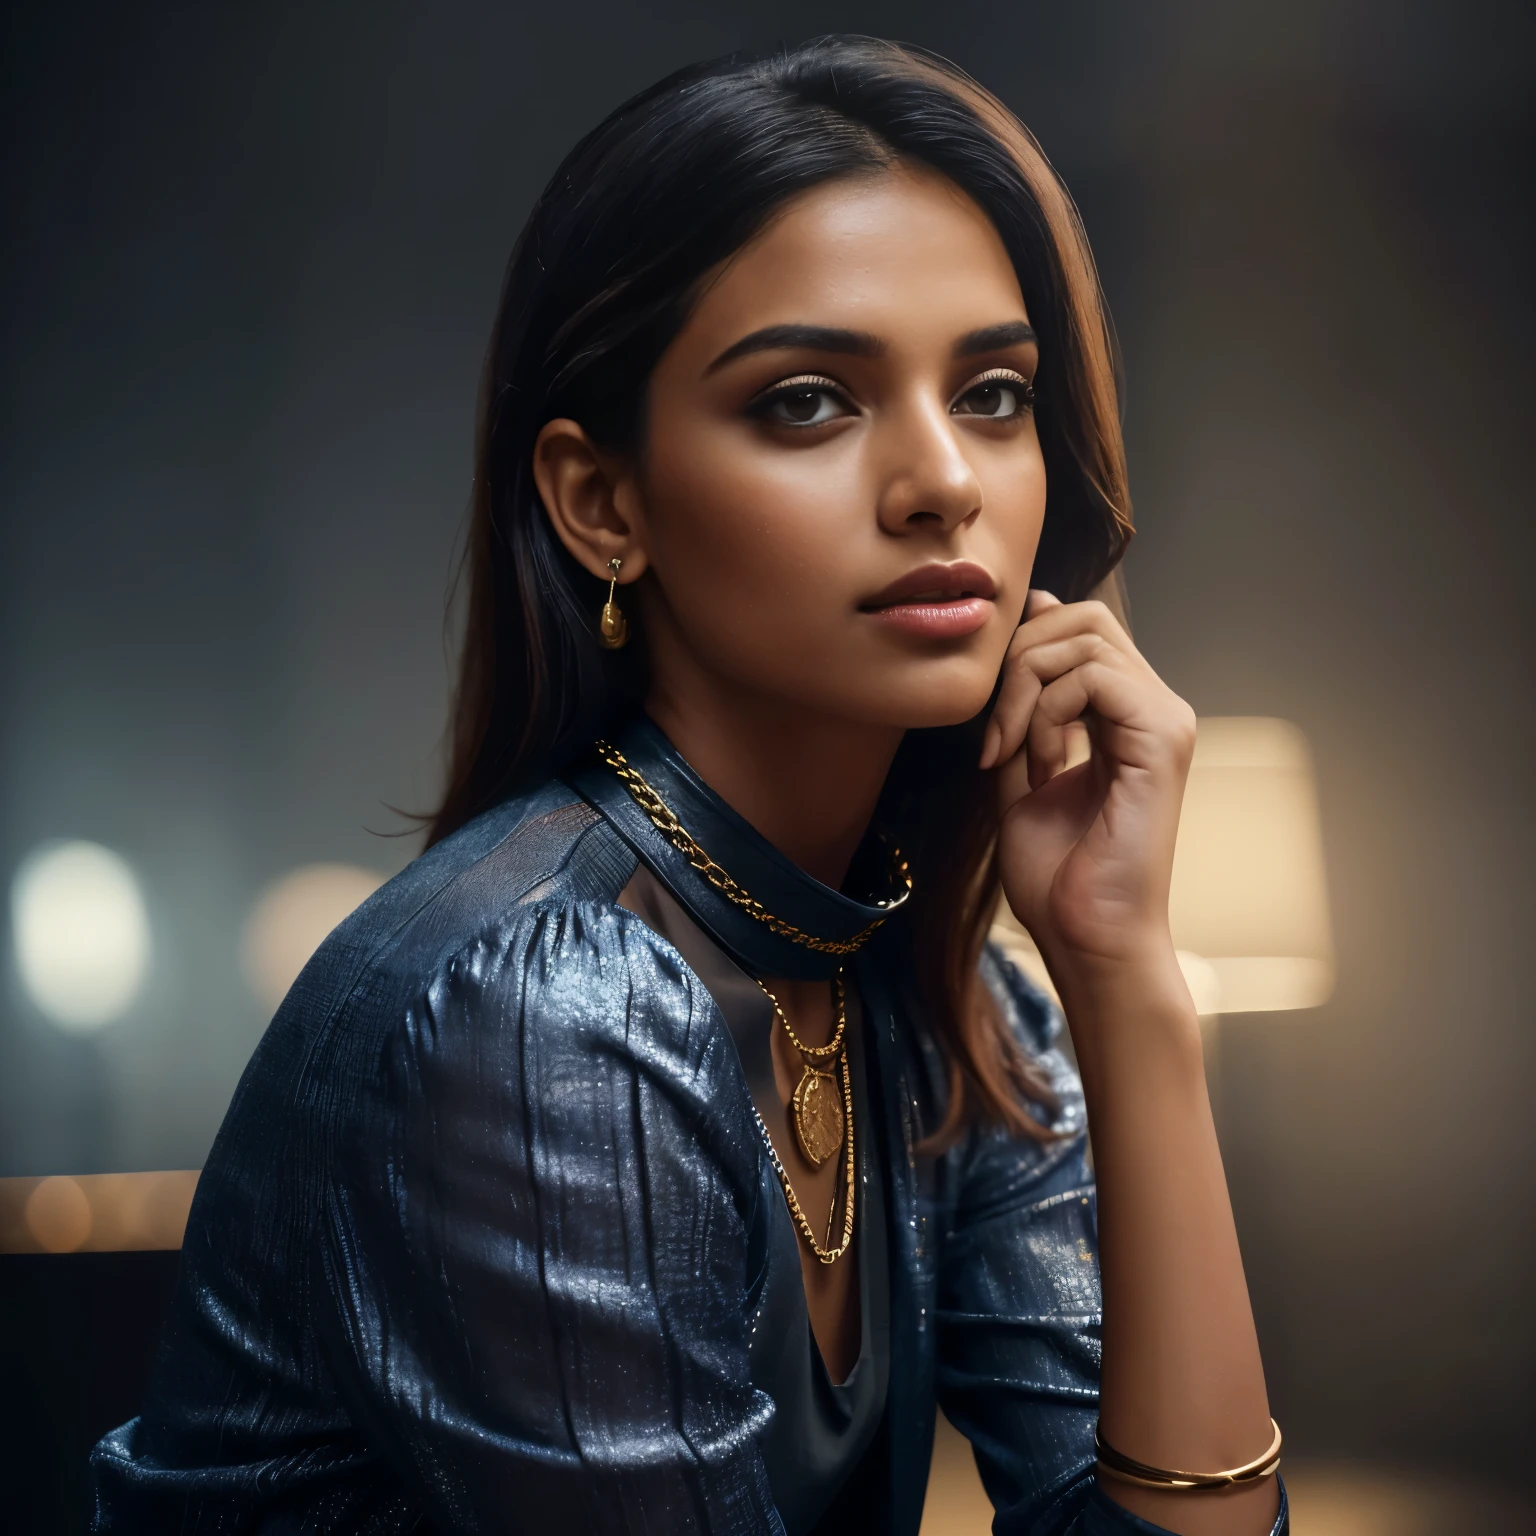 In this photograph, an Indian Instagram female model in her mid-23s takes center stage. , (highly detailed face:1.4) (smile:0.7) (backround 5 star hotel , moody, private study:1.OV, by lee jeffries, nikon d850, film stock photograph ,4 kodak portra 400 ,camera f1.6 lens ,rich colors ,hyper realistic ,lifelike texture, dramatic lighting , cinestill 800, realistic, wearing colorful dobby weave self design fit & flare sexy dress Sweetheart neck Short, puff sleeve Tie-up detail on back Above knee length in flounce hem Attached Lining Chiffon fabric, actress, karla ortiz, posing!!, candid picture, by Max Dauthendey,Completing the aesthetic, the model wears a slave collar with a chain around her neck. The photograph is meticulously captured in 8K resolution using cutting-edge techniques such as Cinema 4D and Octane Render, resulting in a highly detailed and photorealistic image. Studio lighting, HDR, and a smoky mist create a captivating ambiance, while the bokeh effect adds an artistic touch.